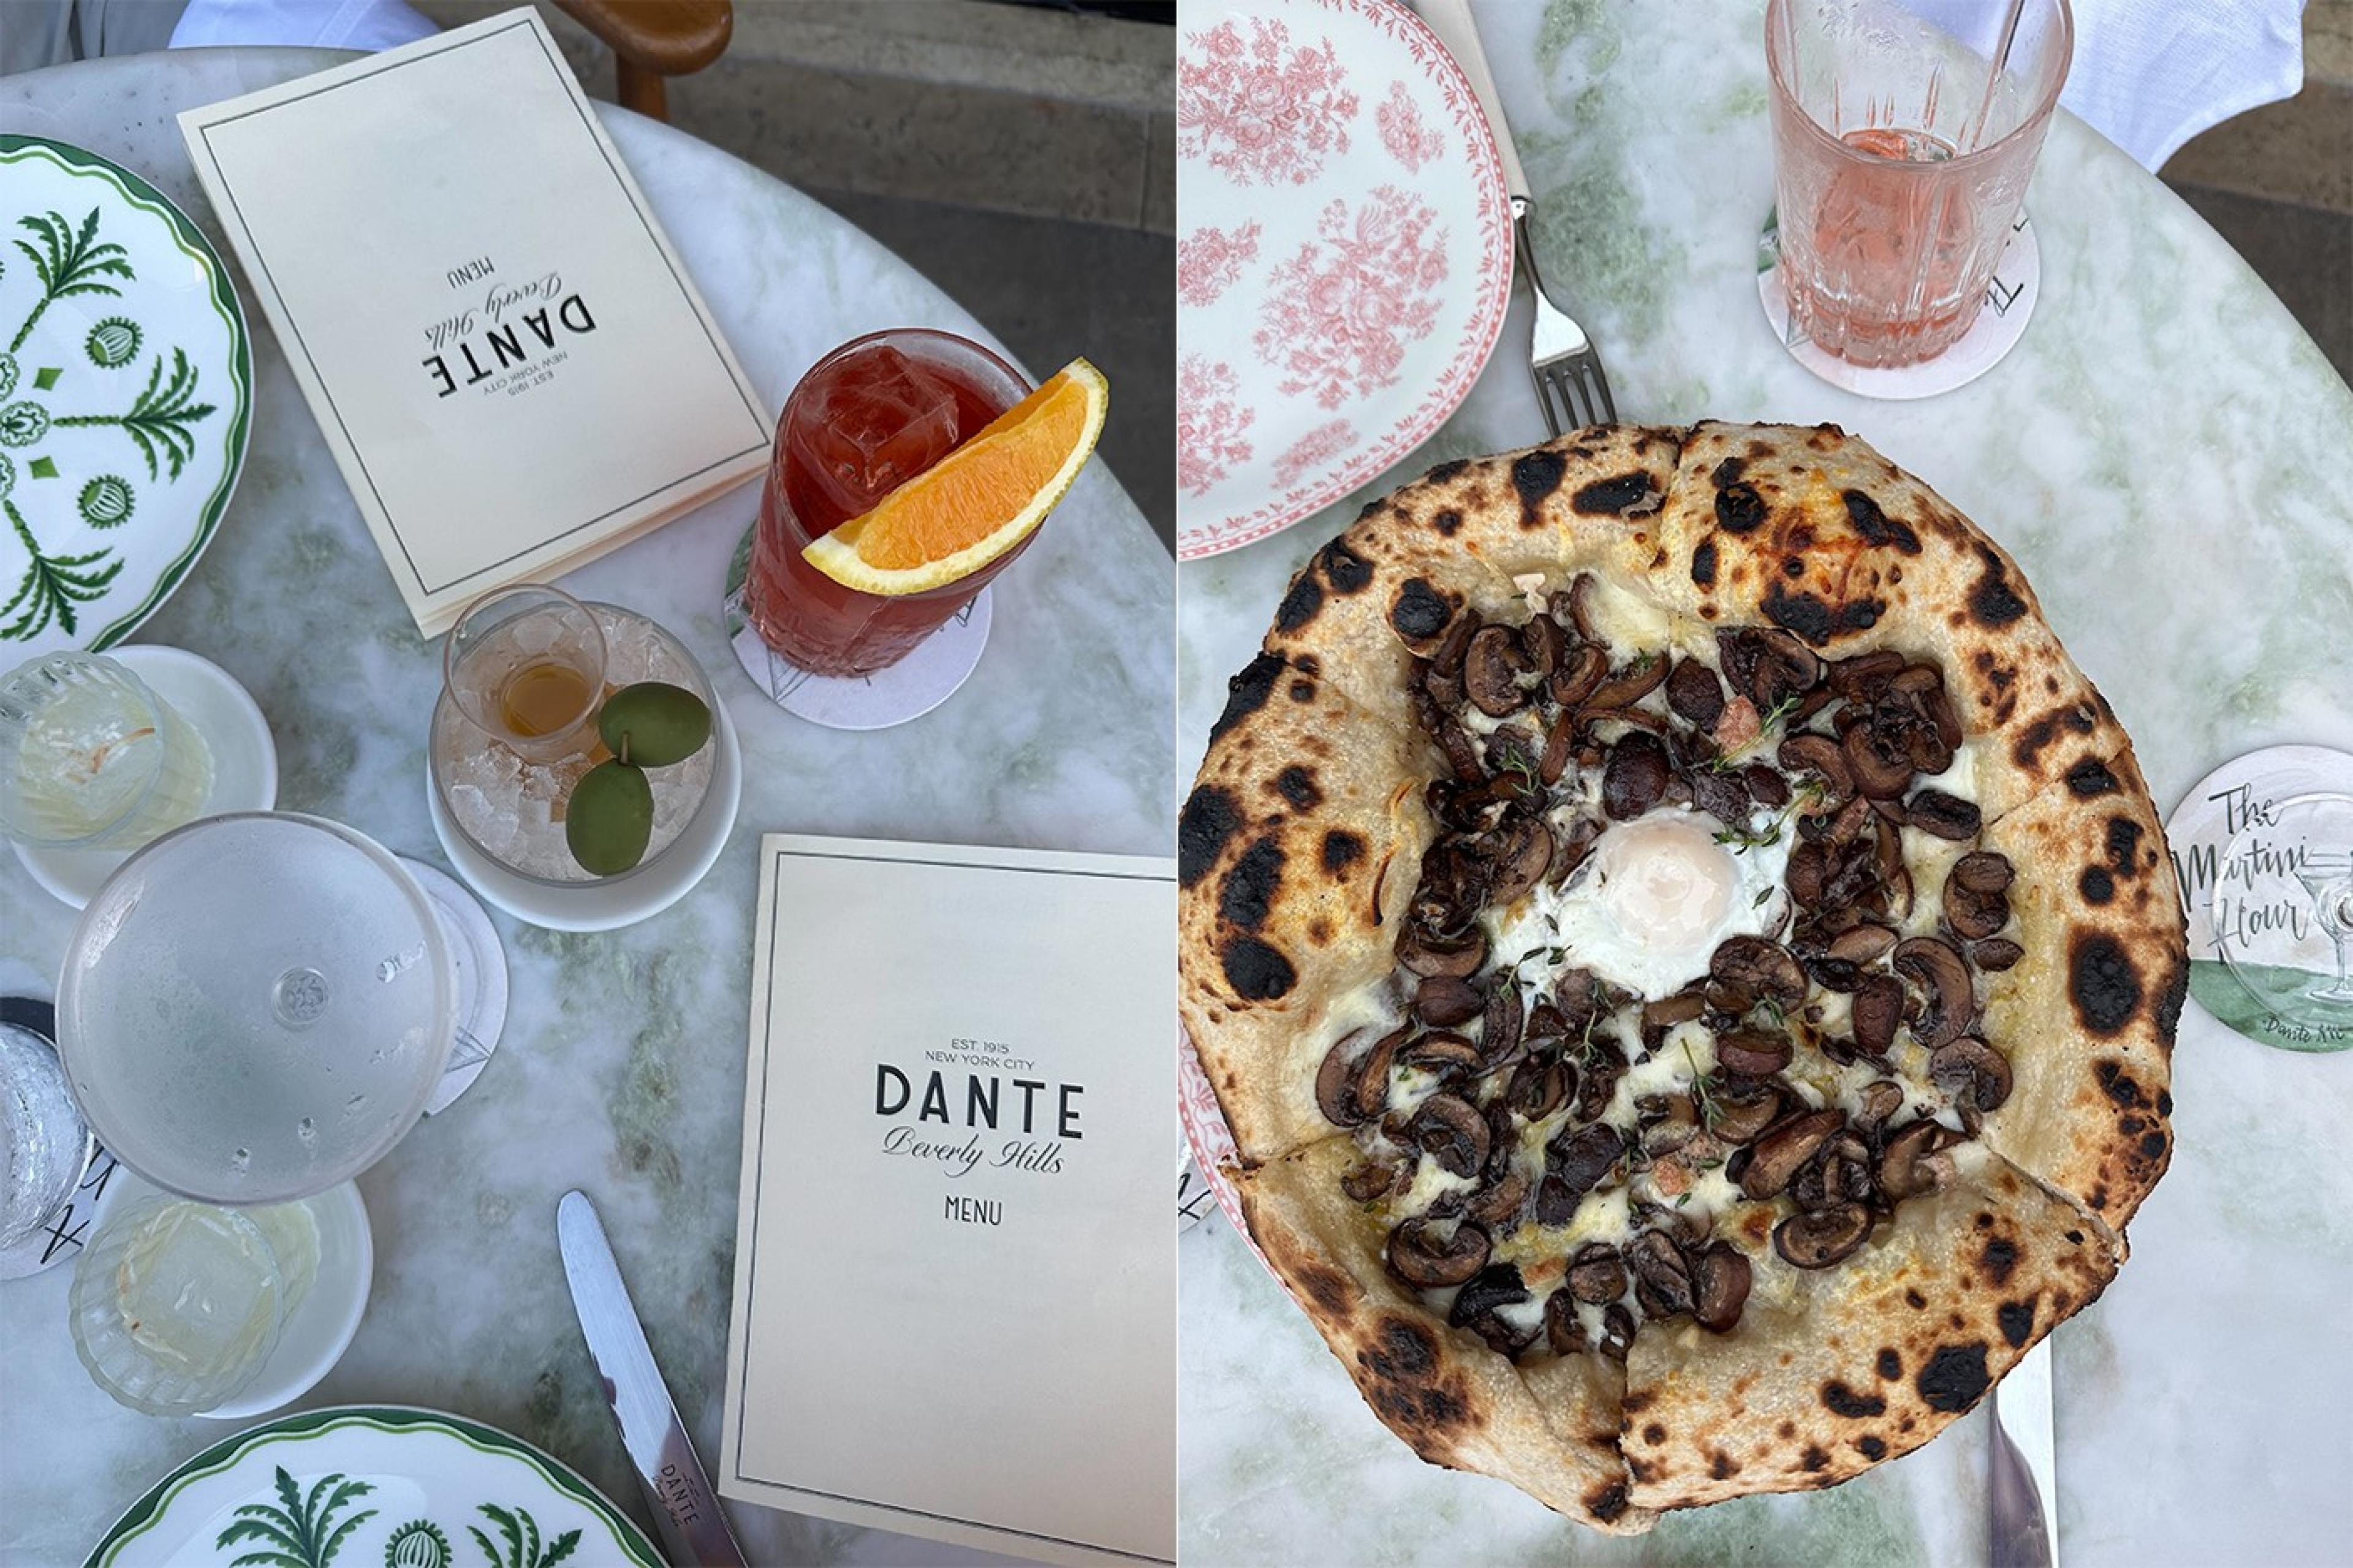 Dante menus and cocktails and a wood-fired pizza with mushrooms and egg